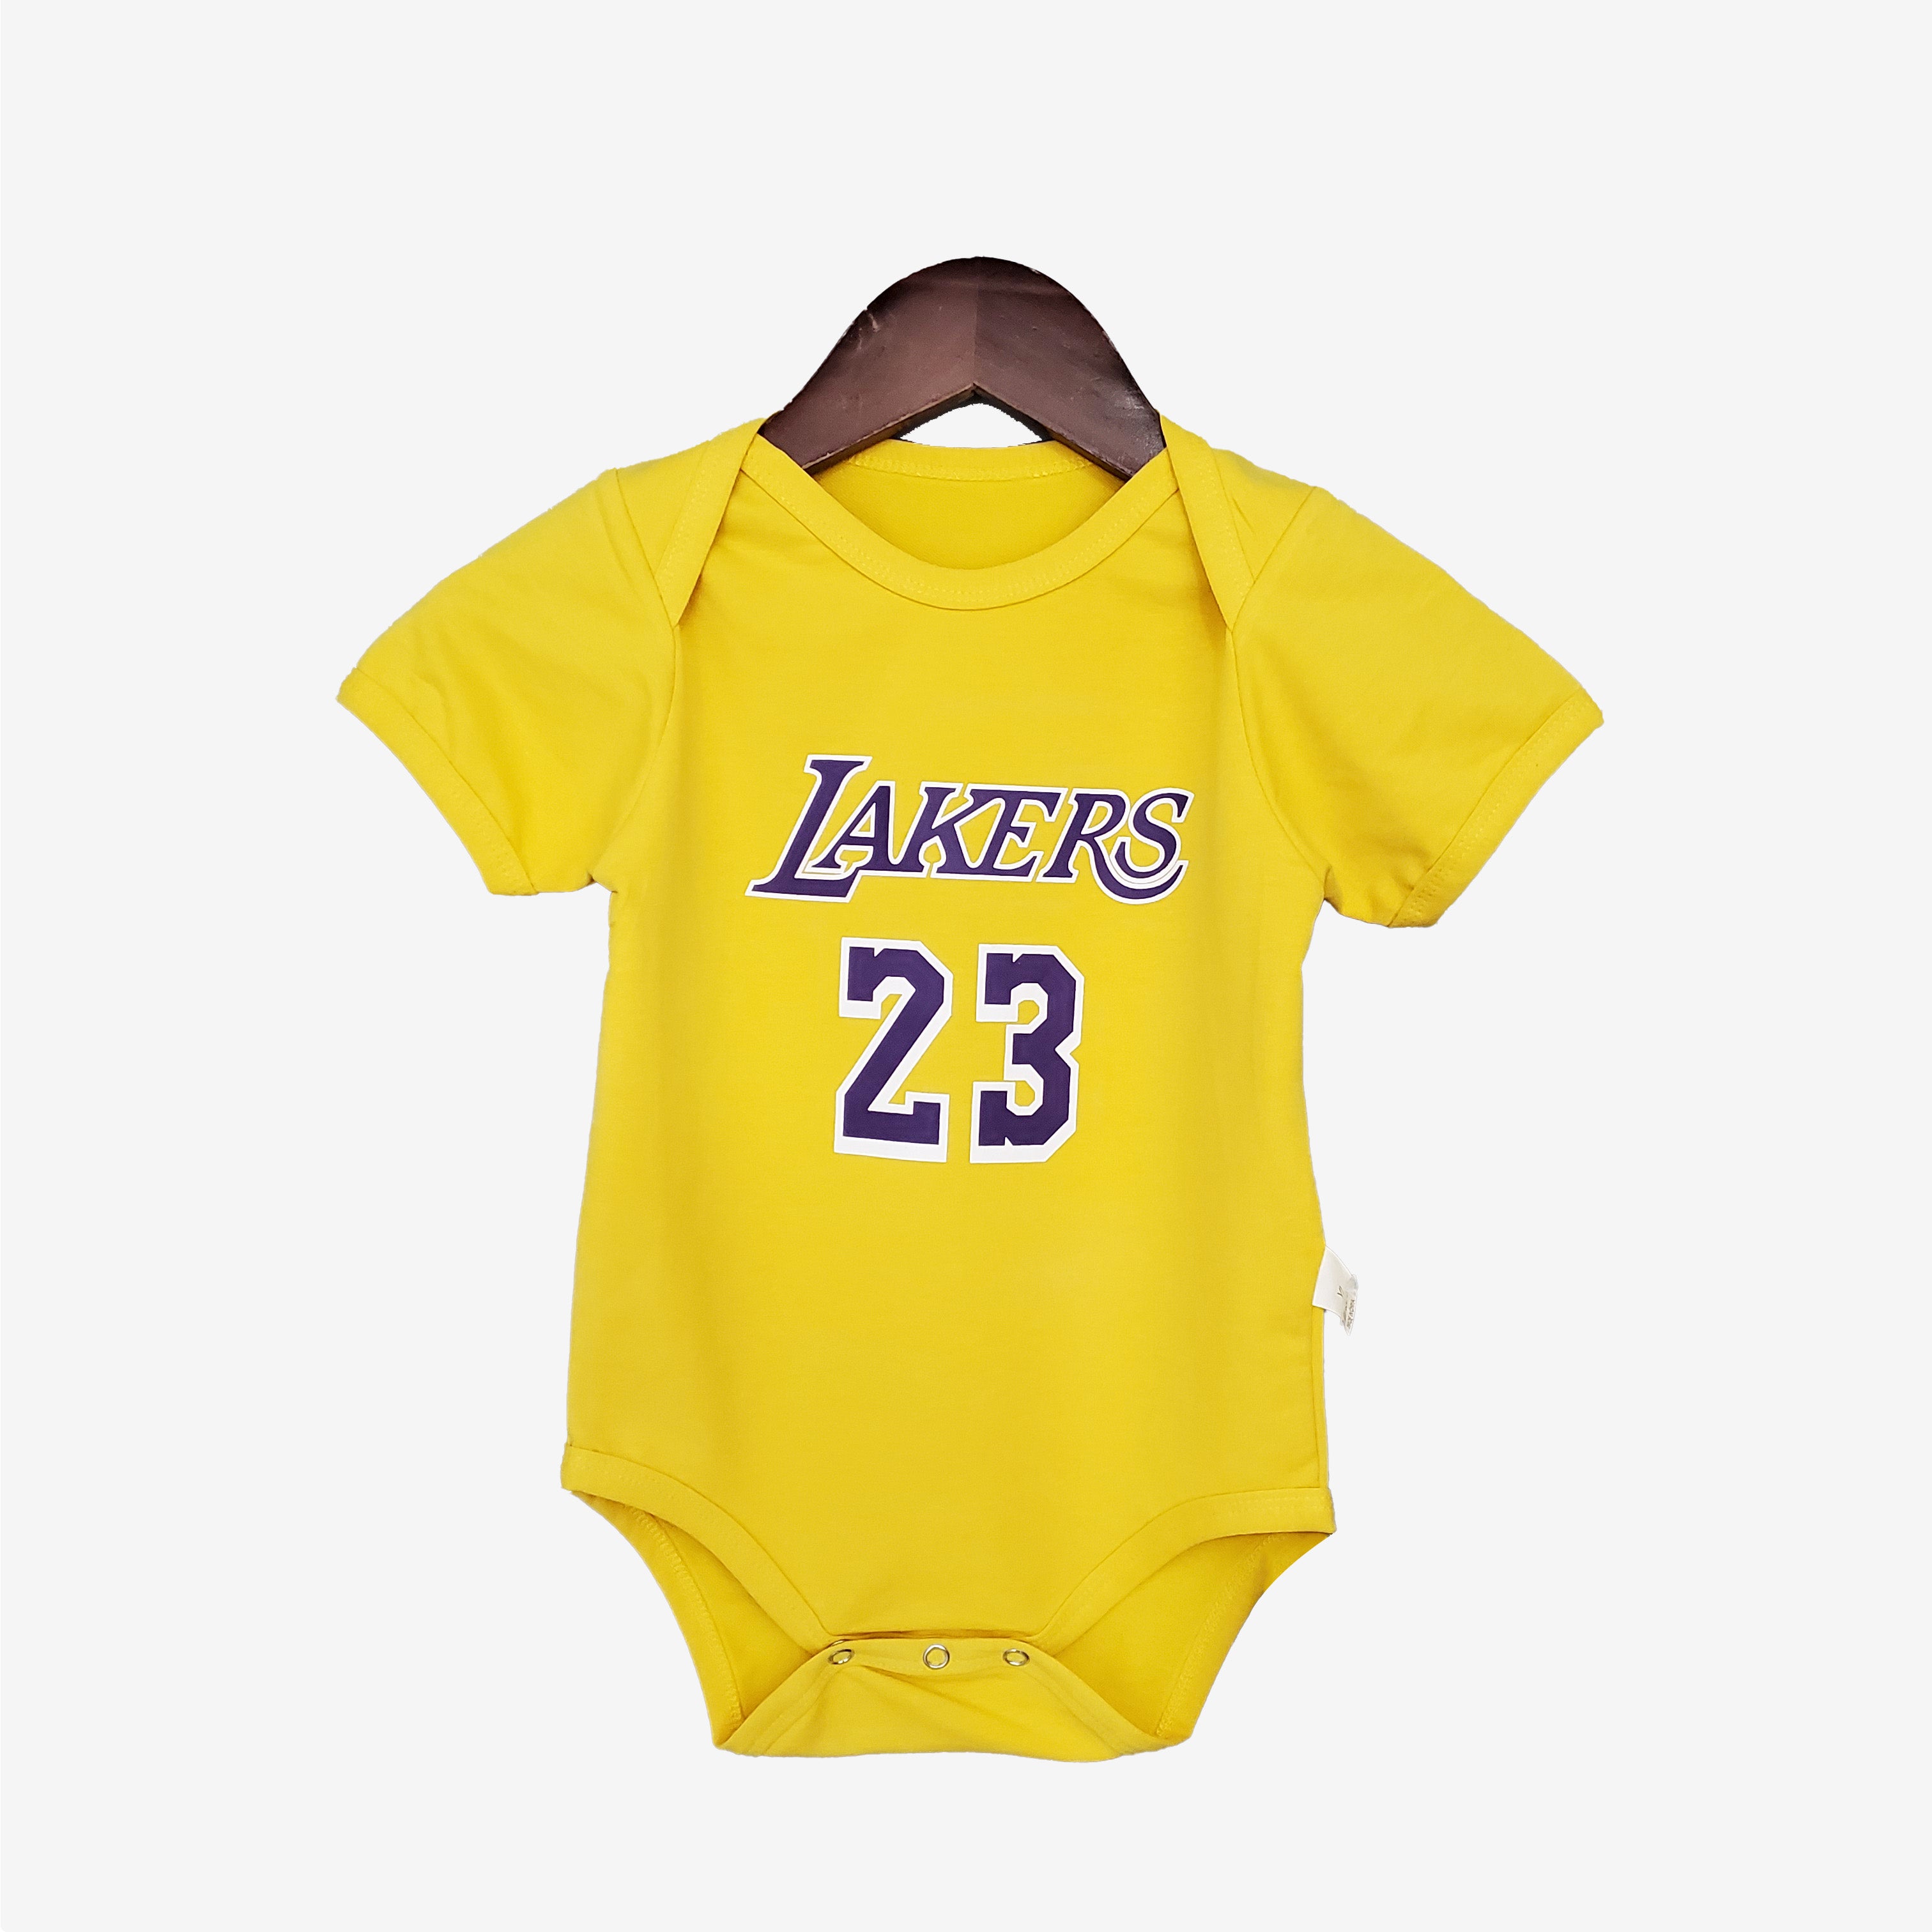 Lakers Baby 